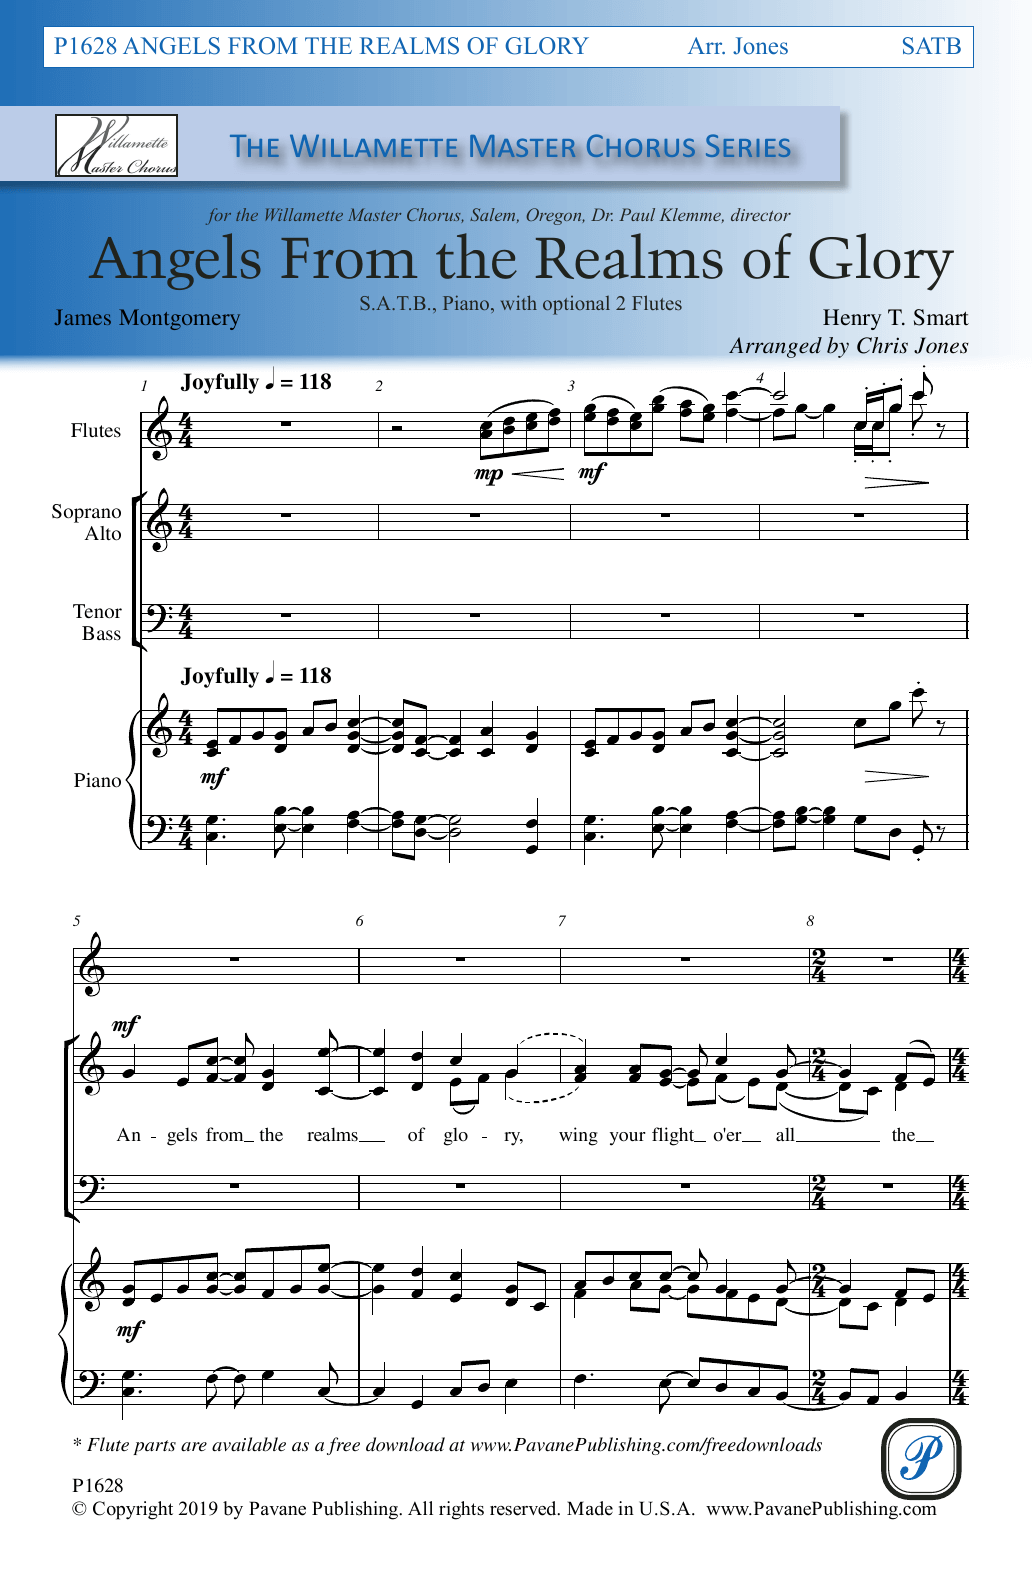 Angels From the Realms of Glory (arr. Chris Jones) (SATB Choir) von James Montgomery and Henry T. Smart